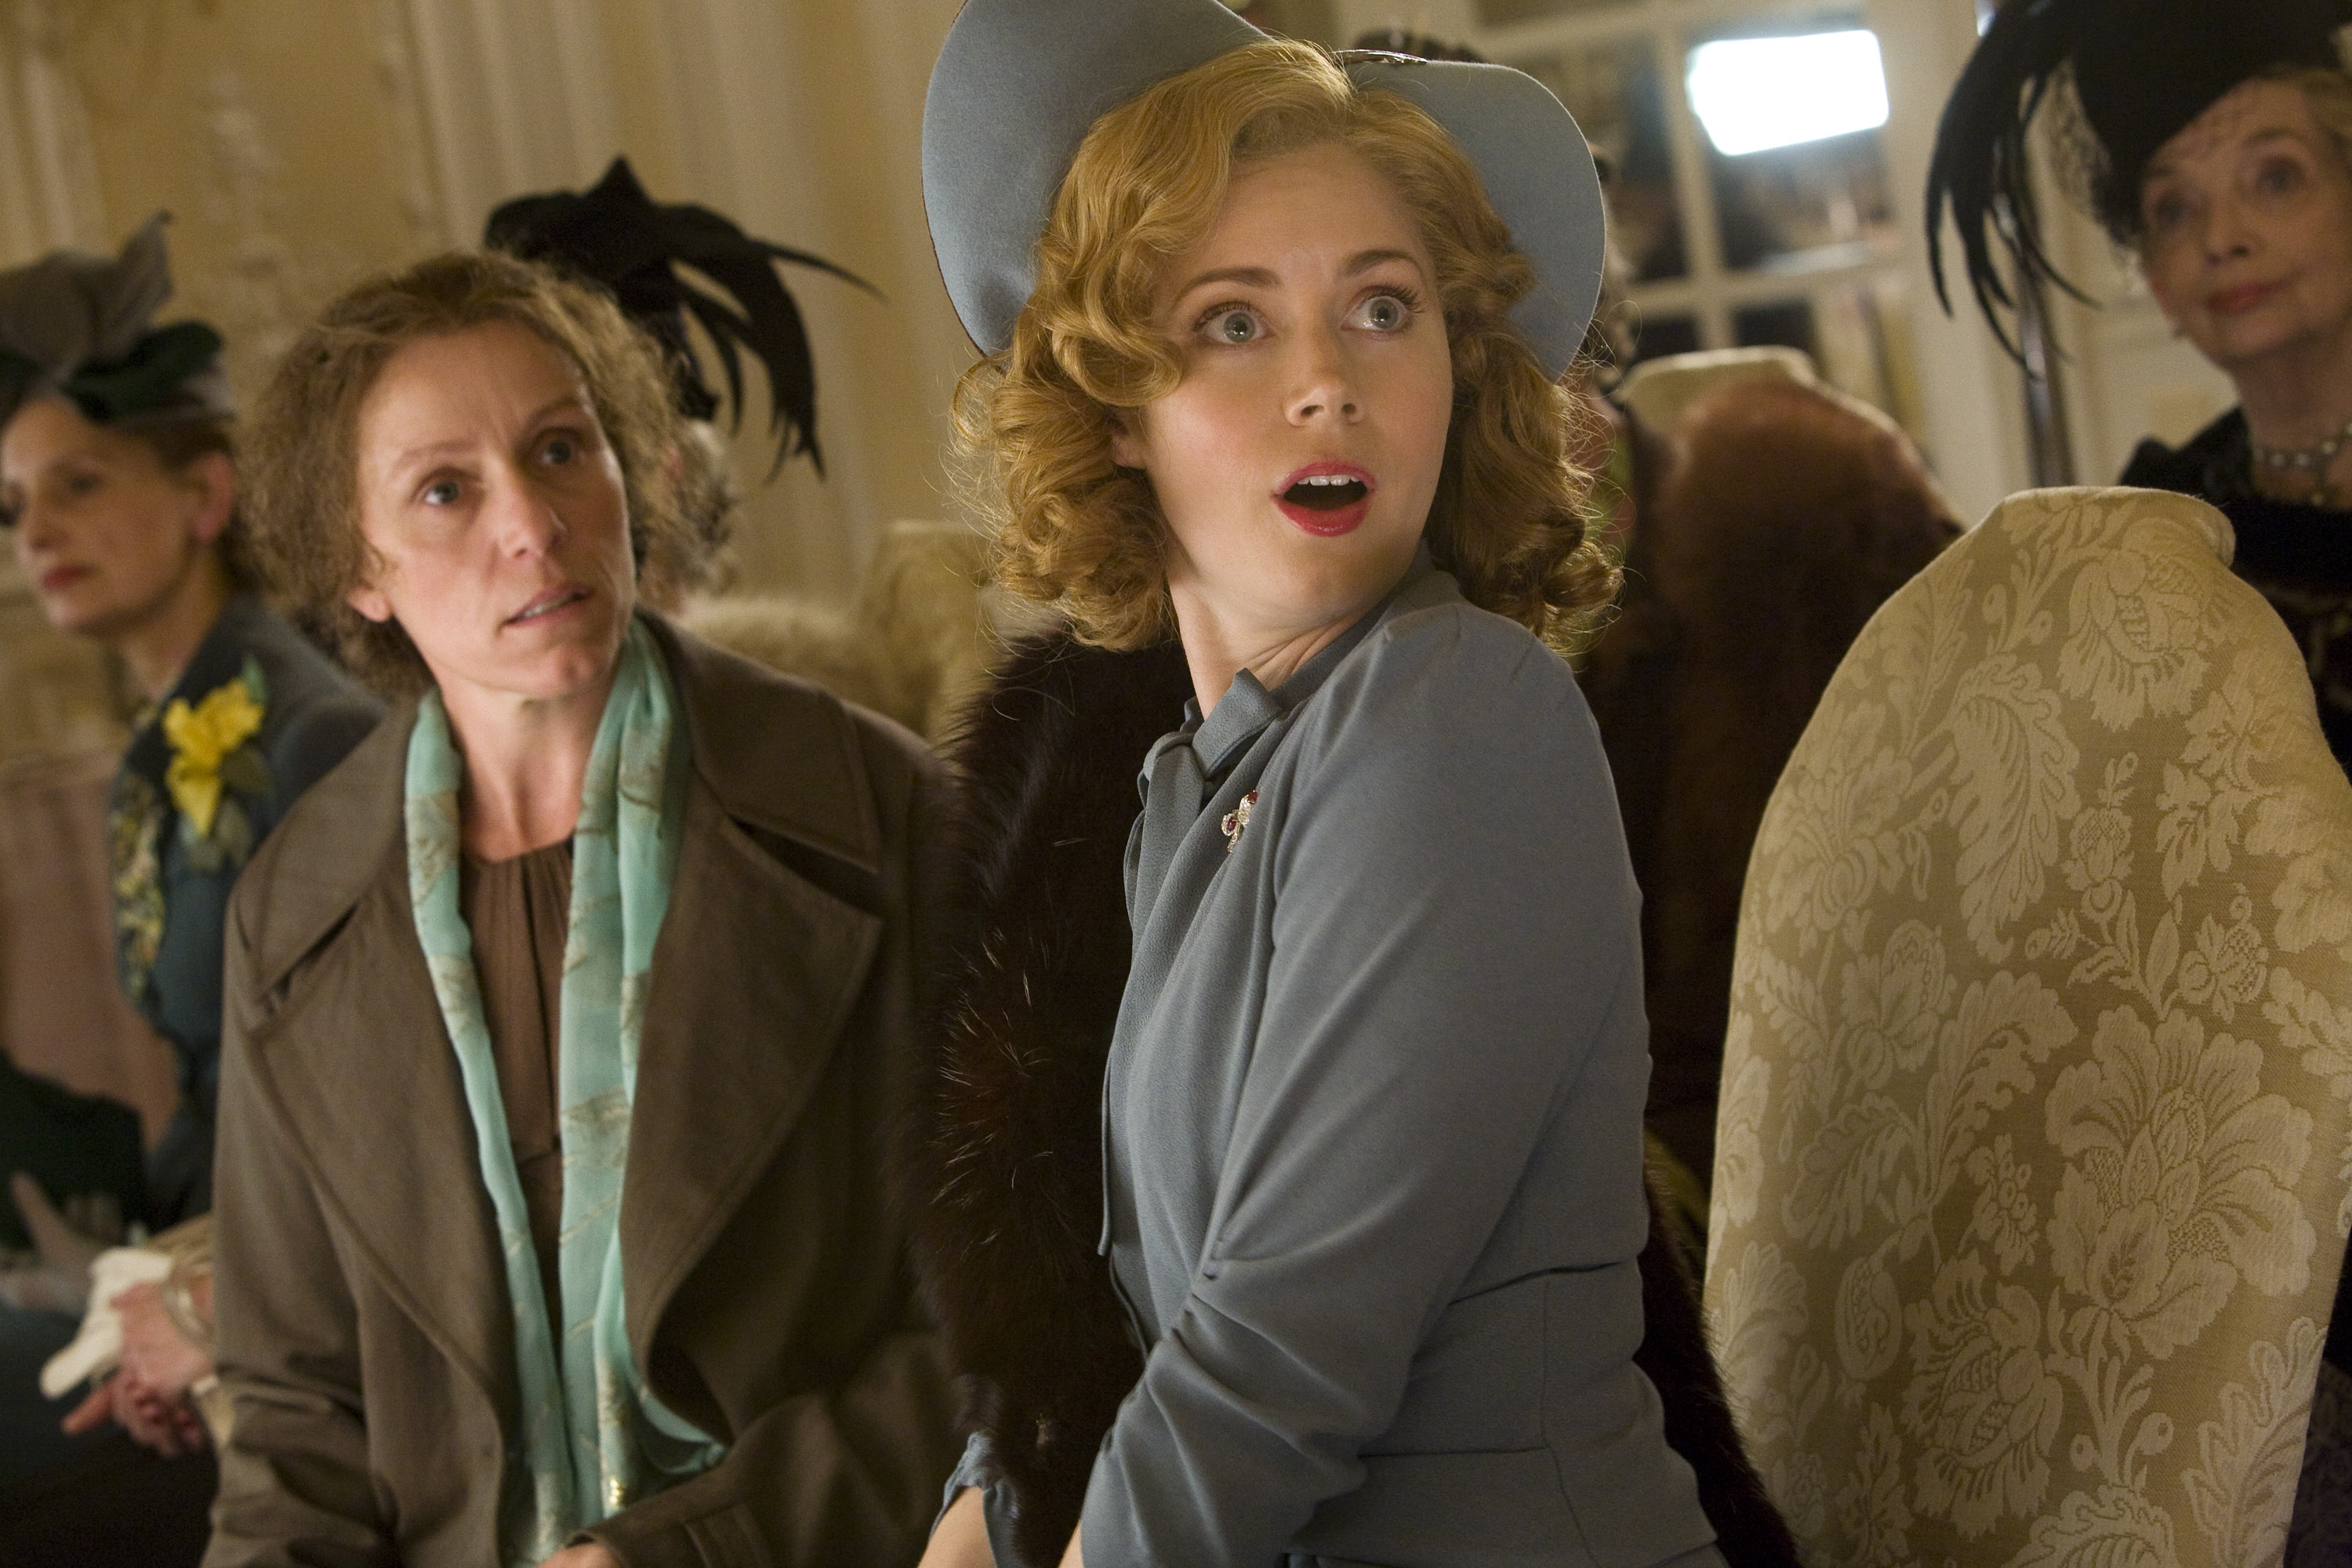 Frances McDormand (left) and Amy Adams (right) star in Bharat Nalluri's MISS PETTIGREW LIVES FOR A DAY, a Focus Features release.